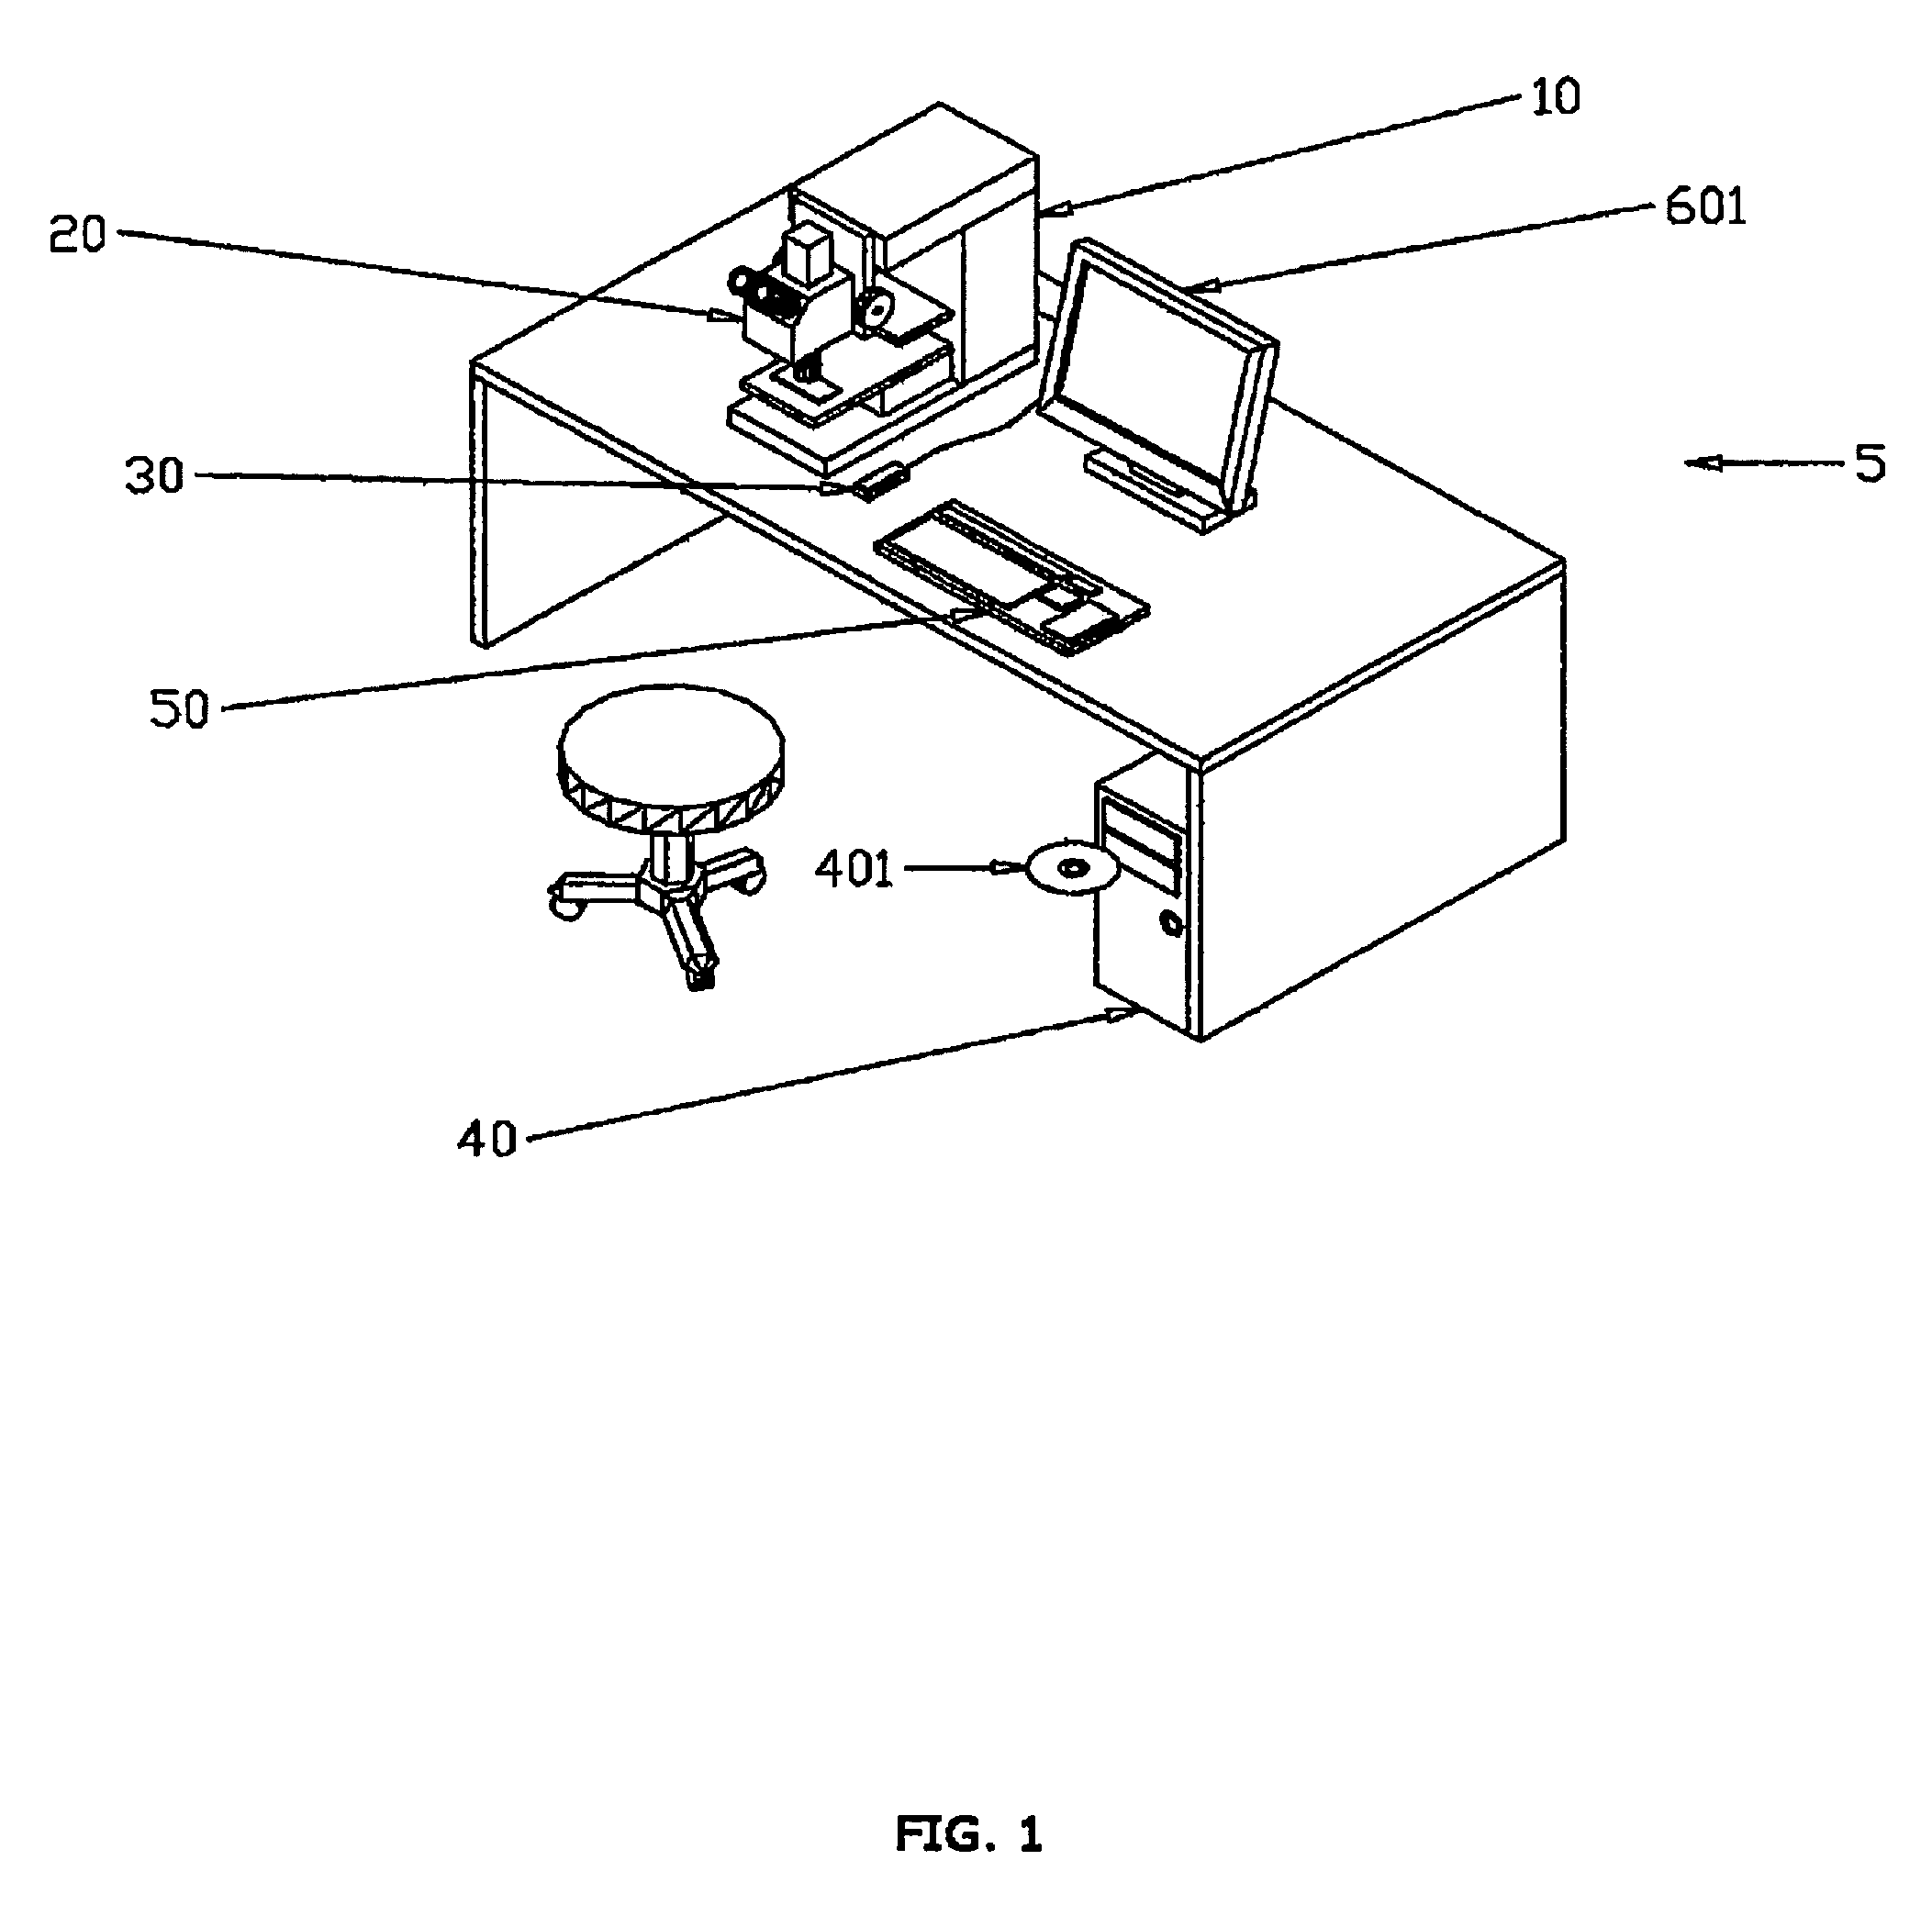 Tissue punch and tissue sample labeling methods and devices for microarray preparation, archiving and documentation